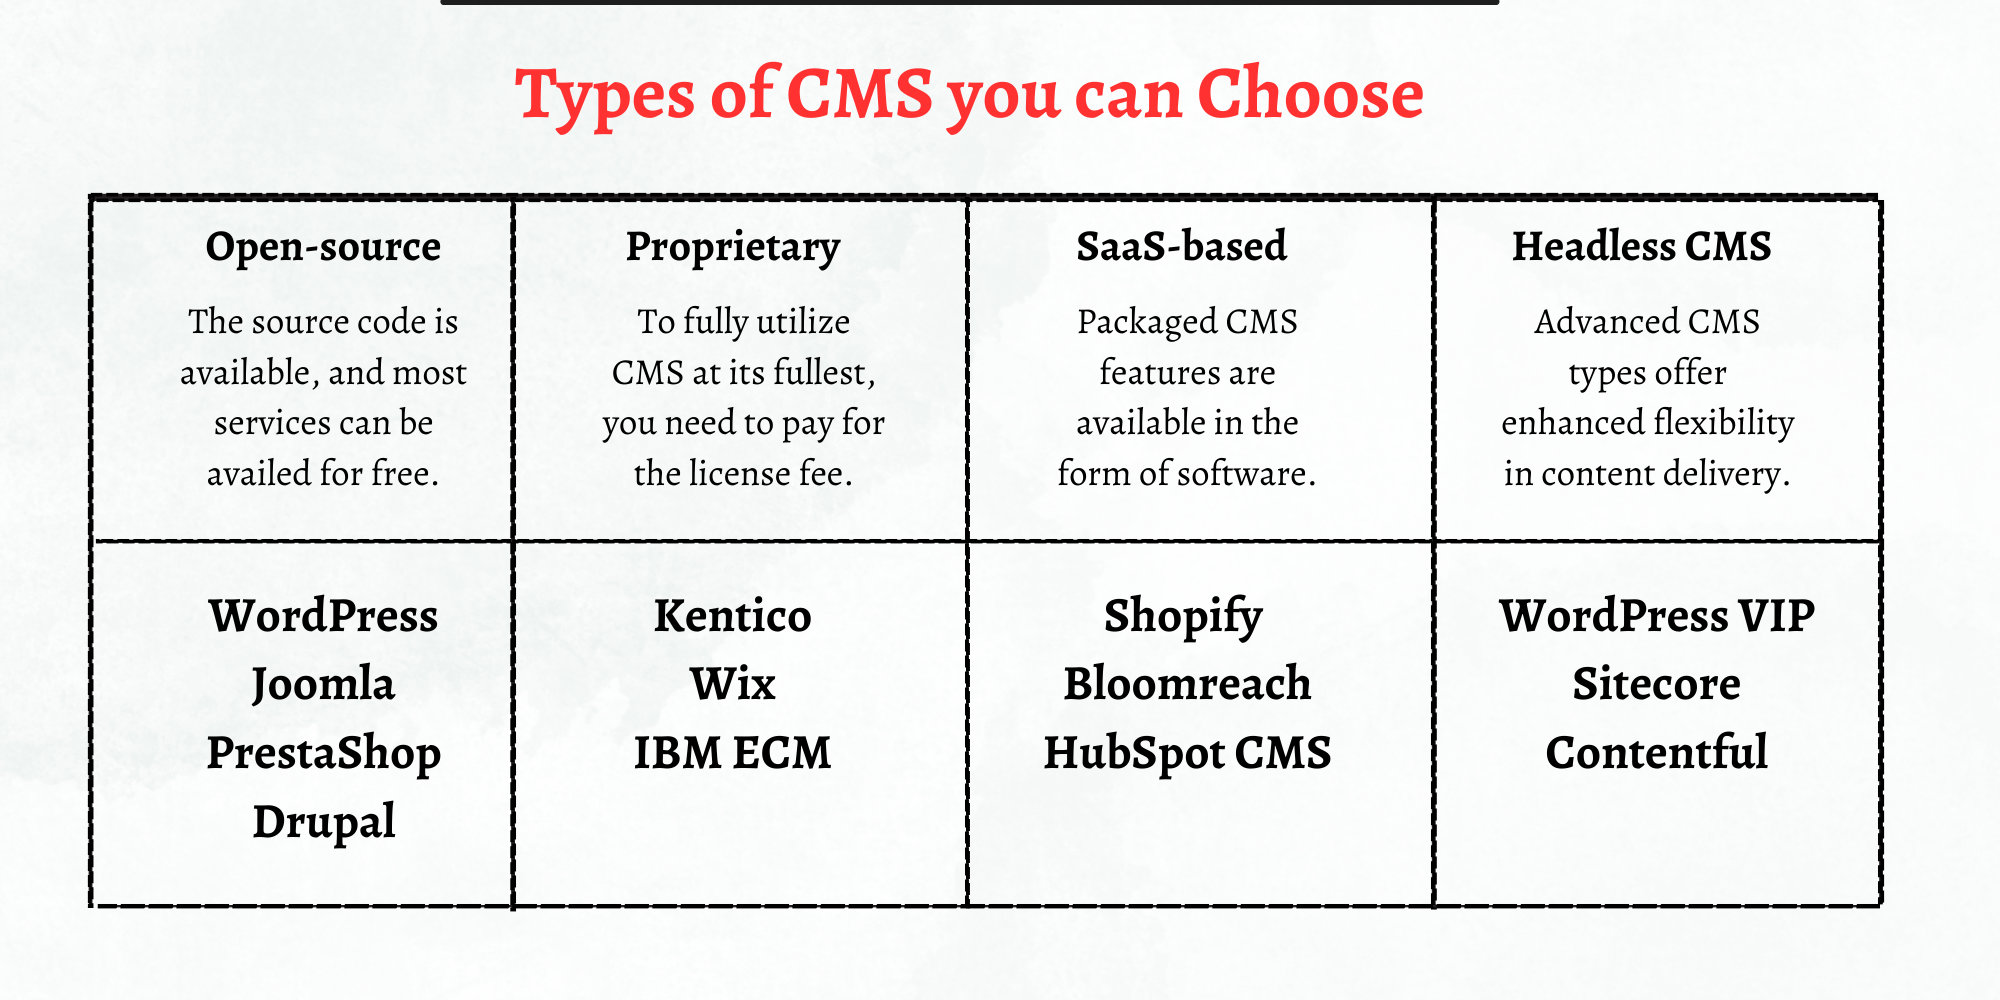 Types of CMS you can Choose